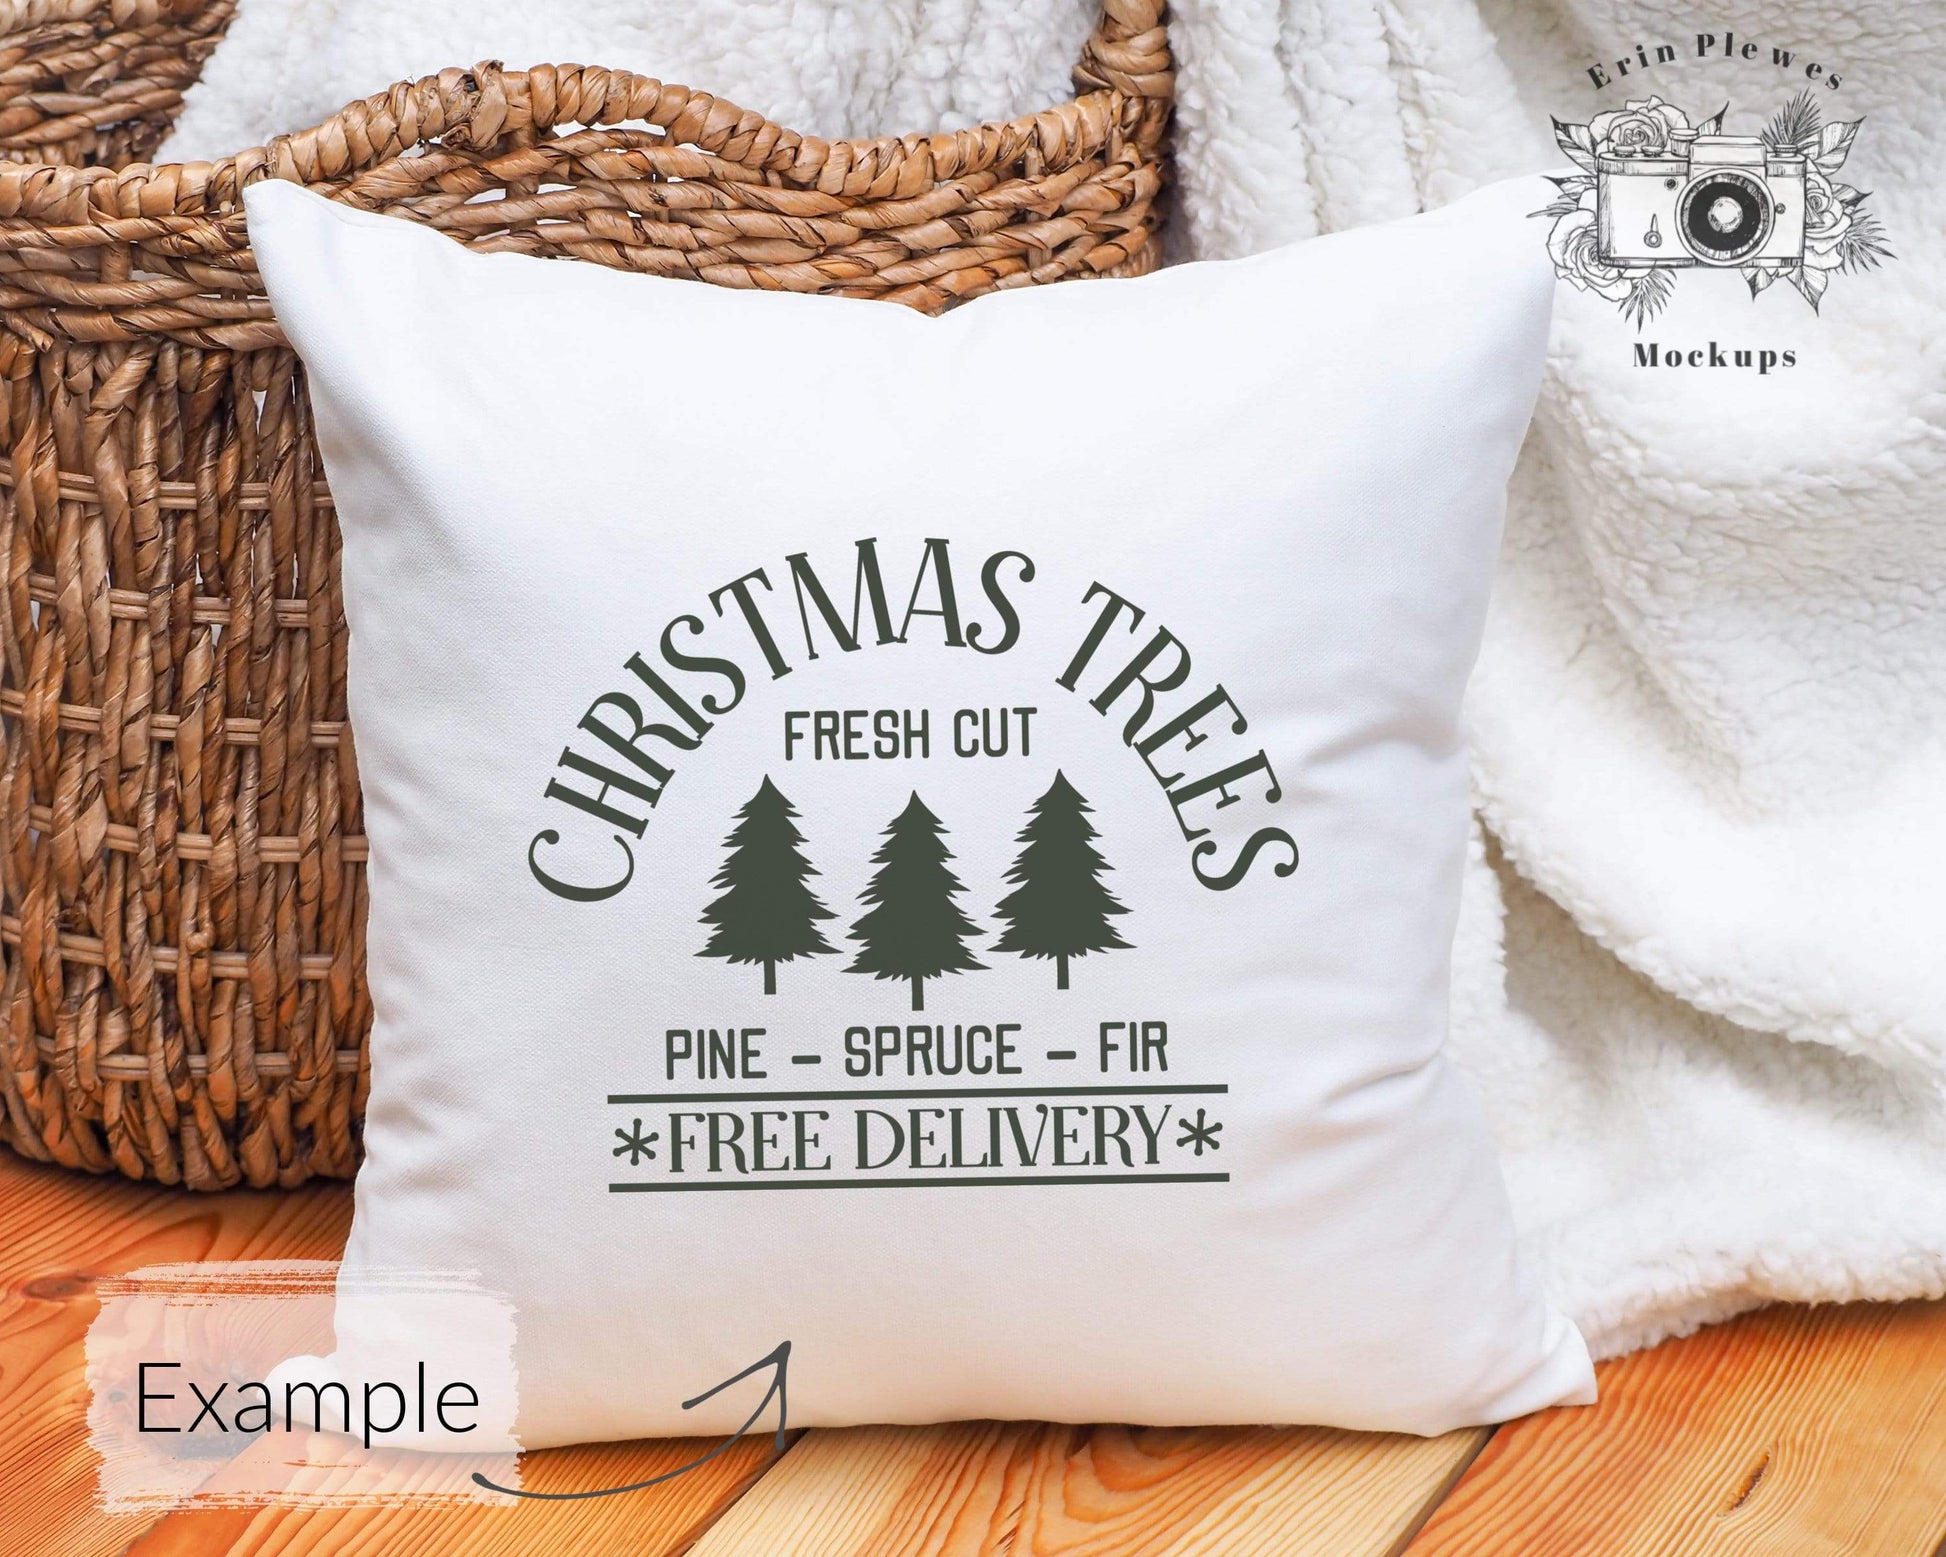 Erin Plewes Mockups Pillow Mockup, Square pillow mockup with rustic wood background for lifestyle stock photography, White pillow mock up jpeg digital download